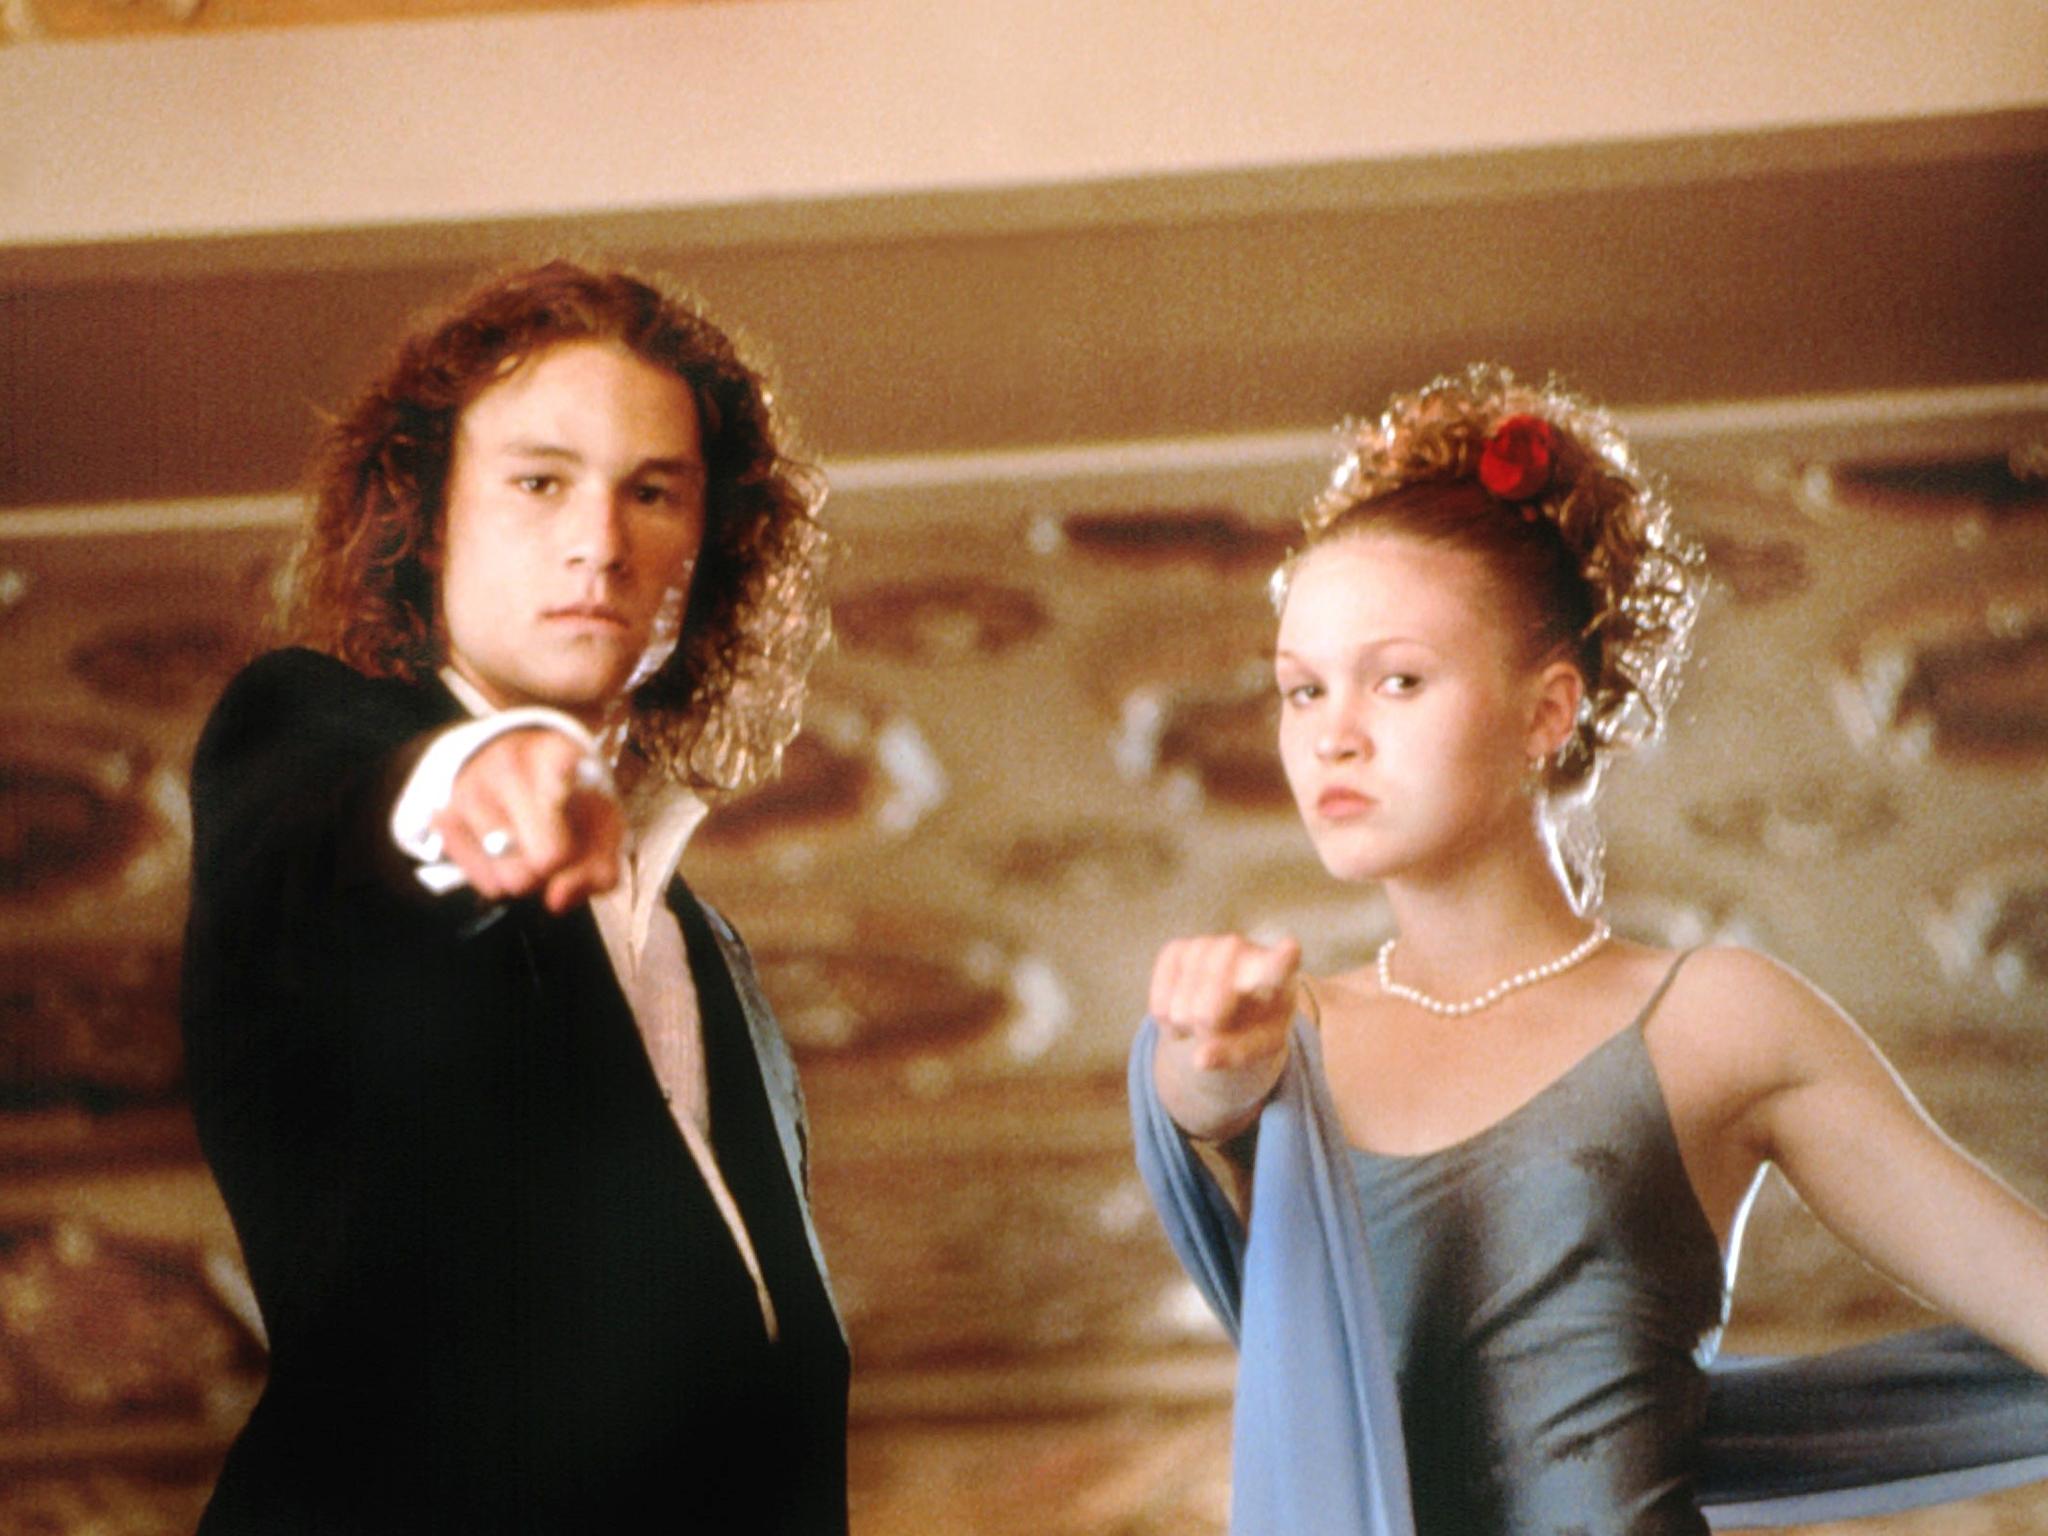 Julia Stiles with Heath Ledger in 10 Things I Hate About You (Rex Features)